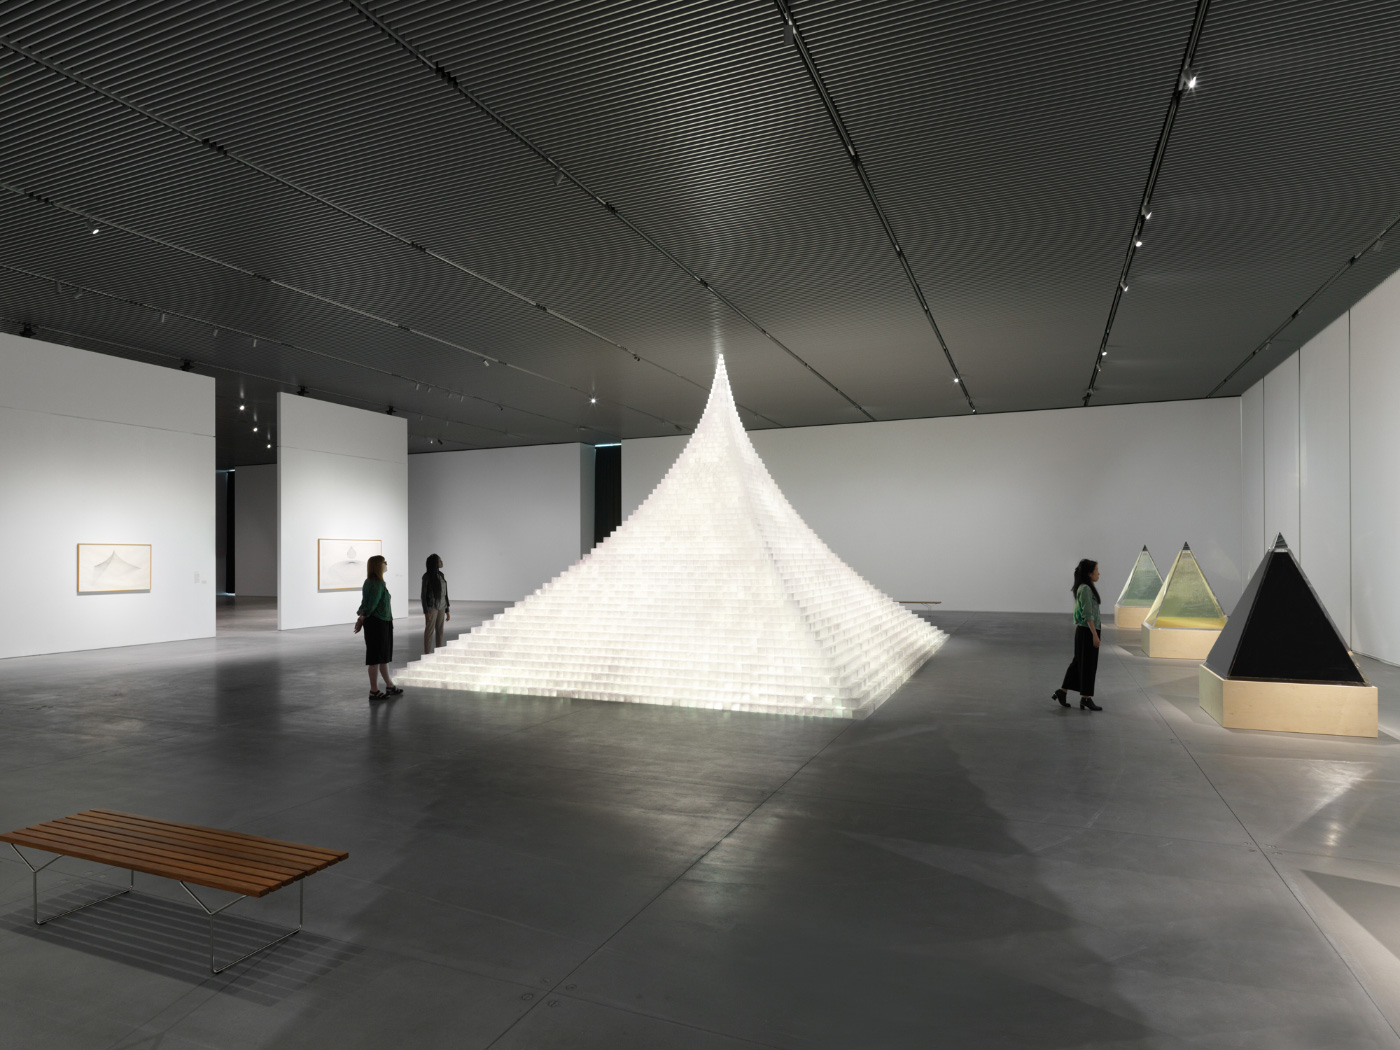 A glowing pyramid in a massive arts space, now closed due to coronavirus